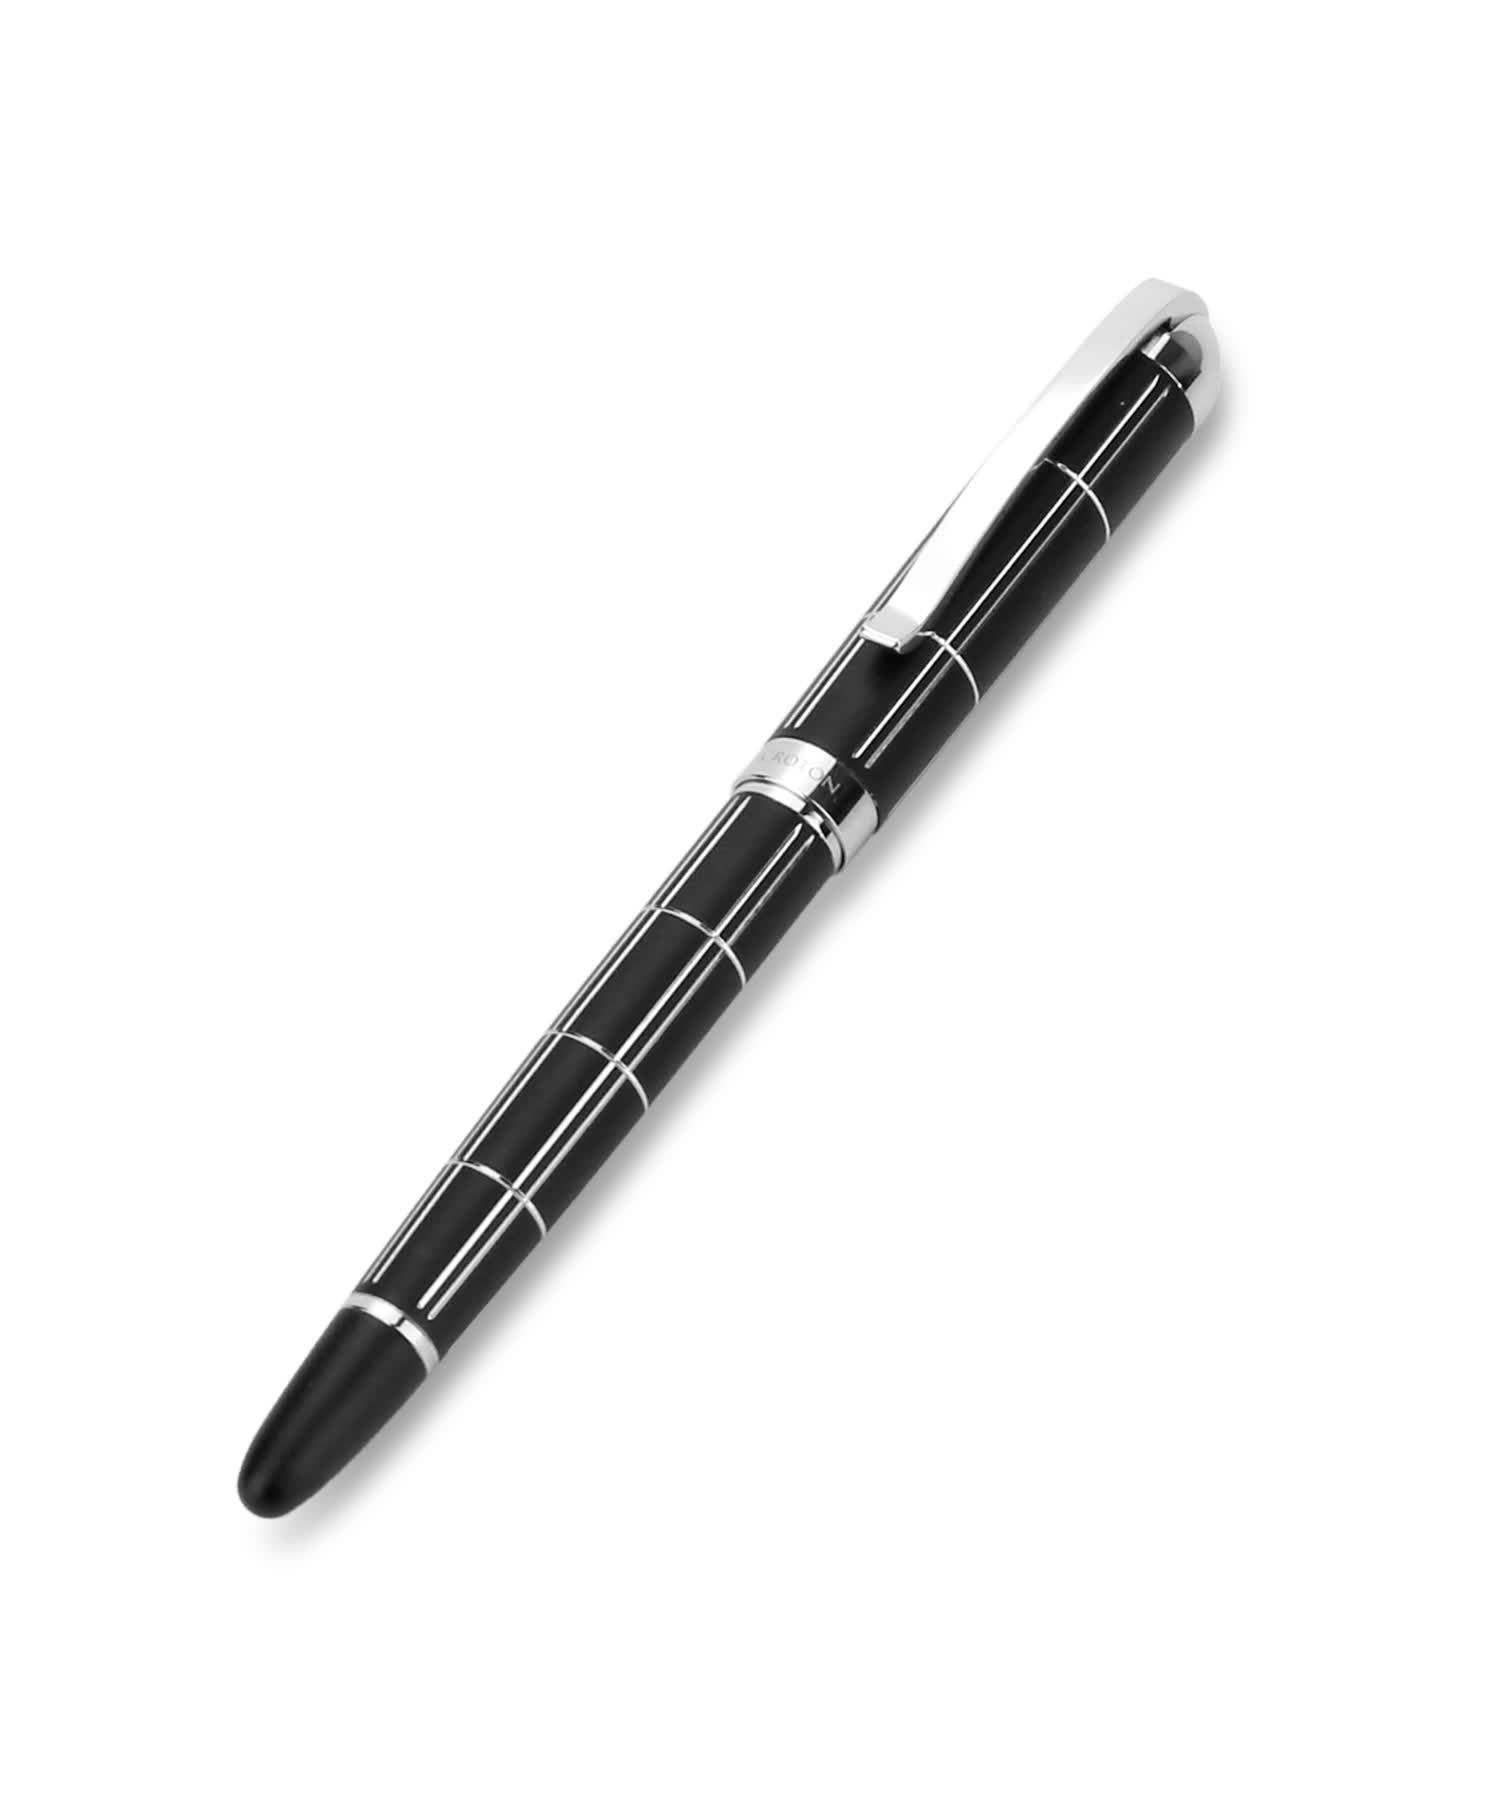 Croton Ballpoint Pen With Laser Cut Grooves In Matte Black and Chrome Accents View 2